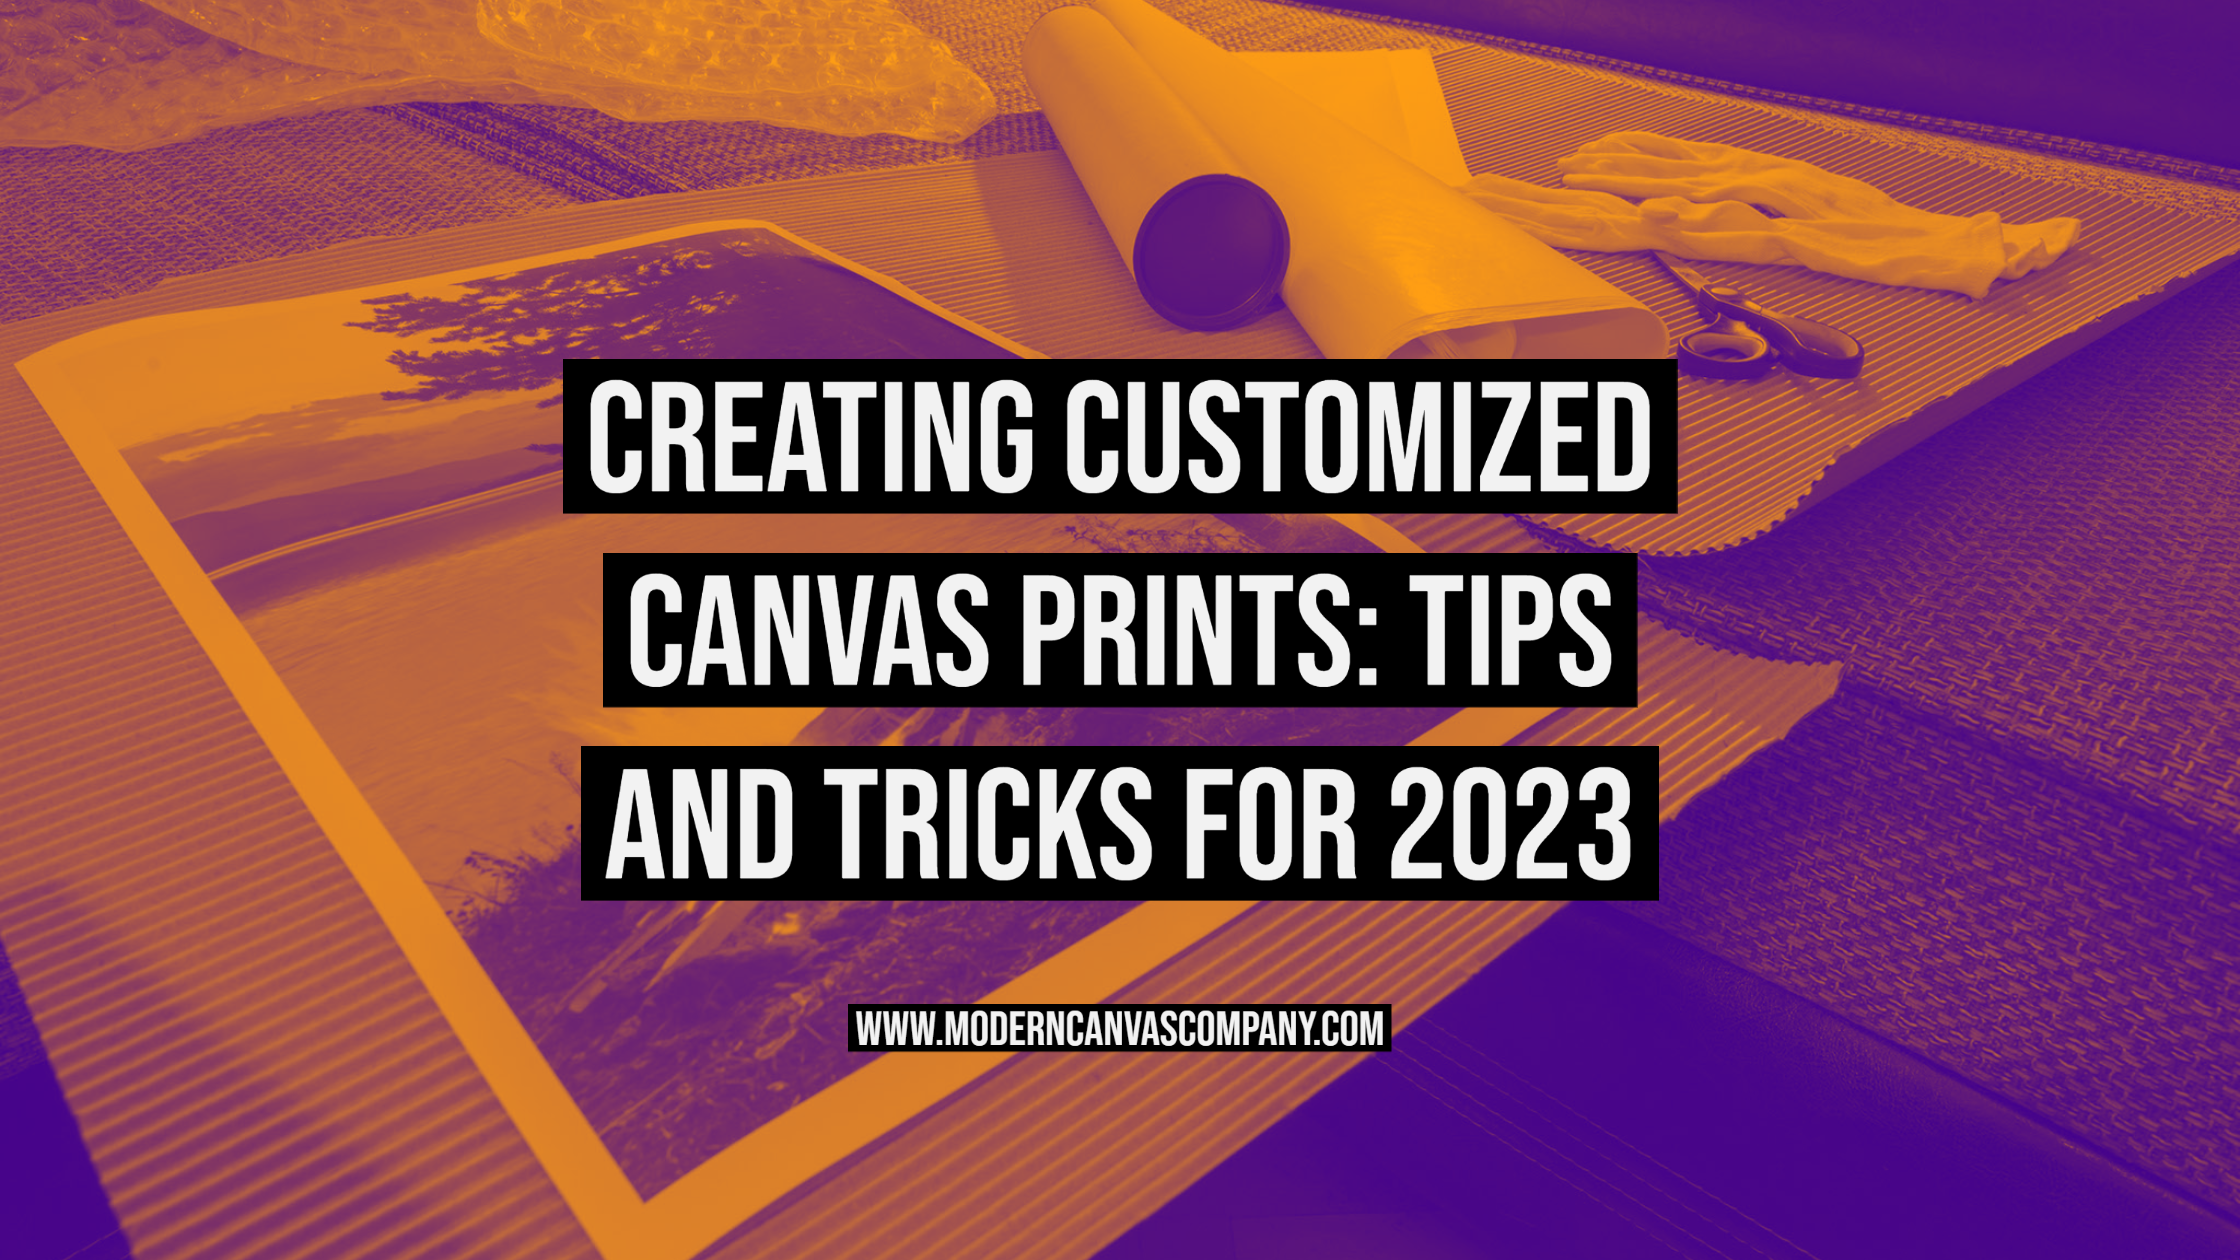 Creating Customized Canvas Prints: Tips and Tricks for 2023